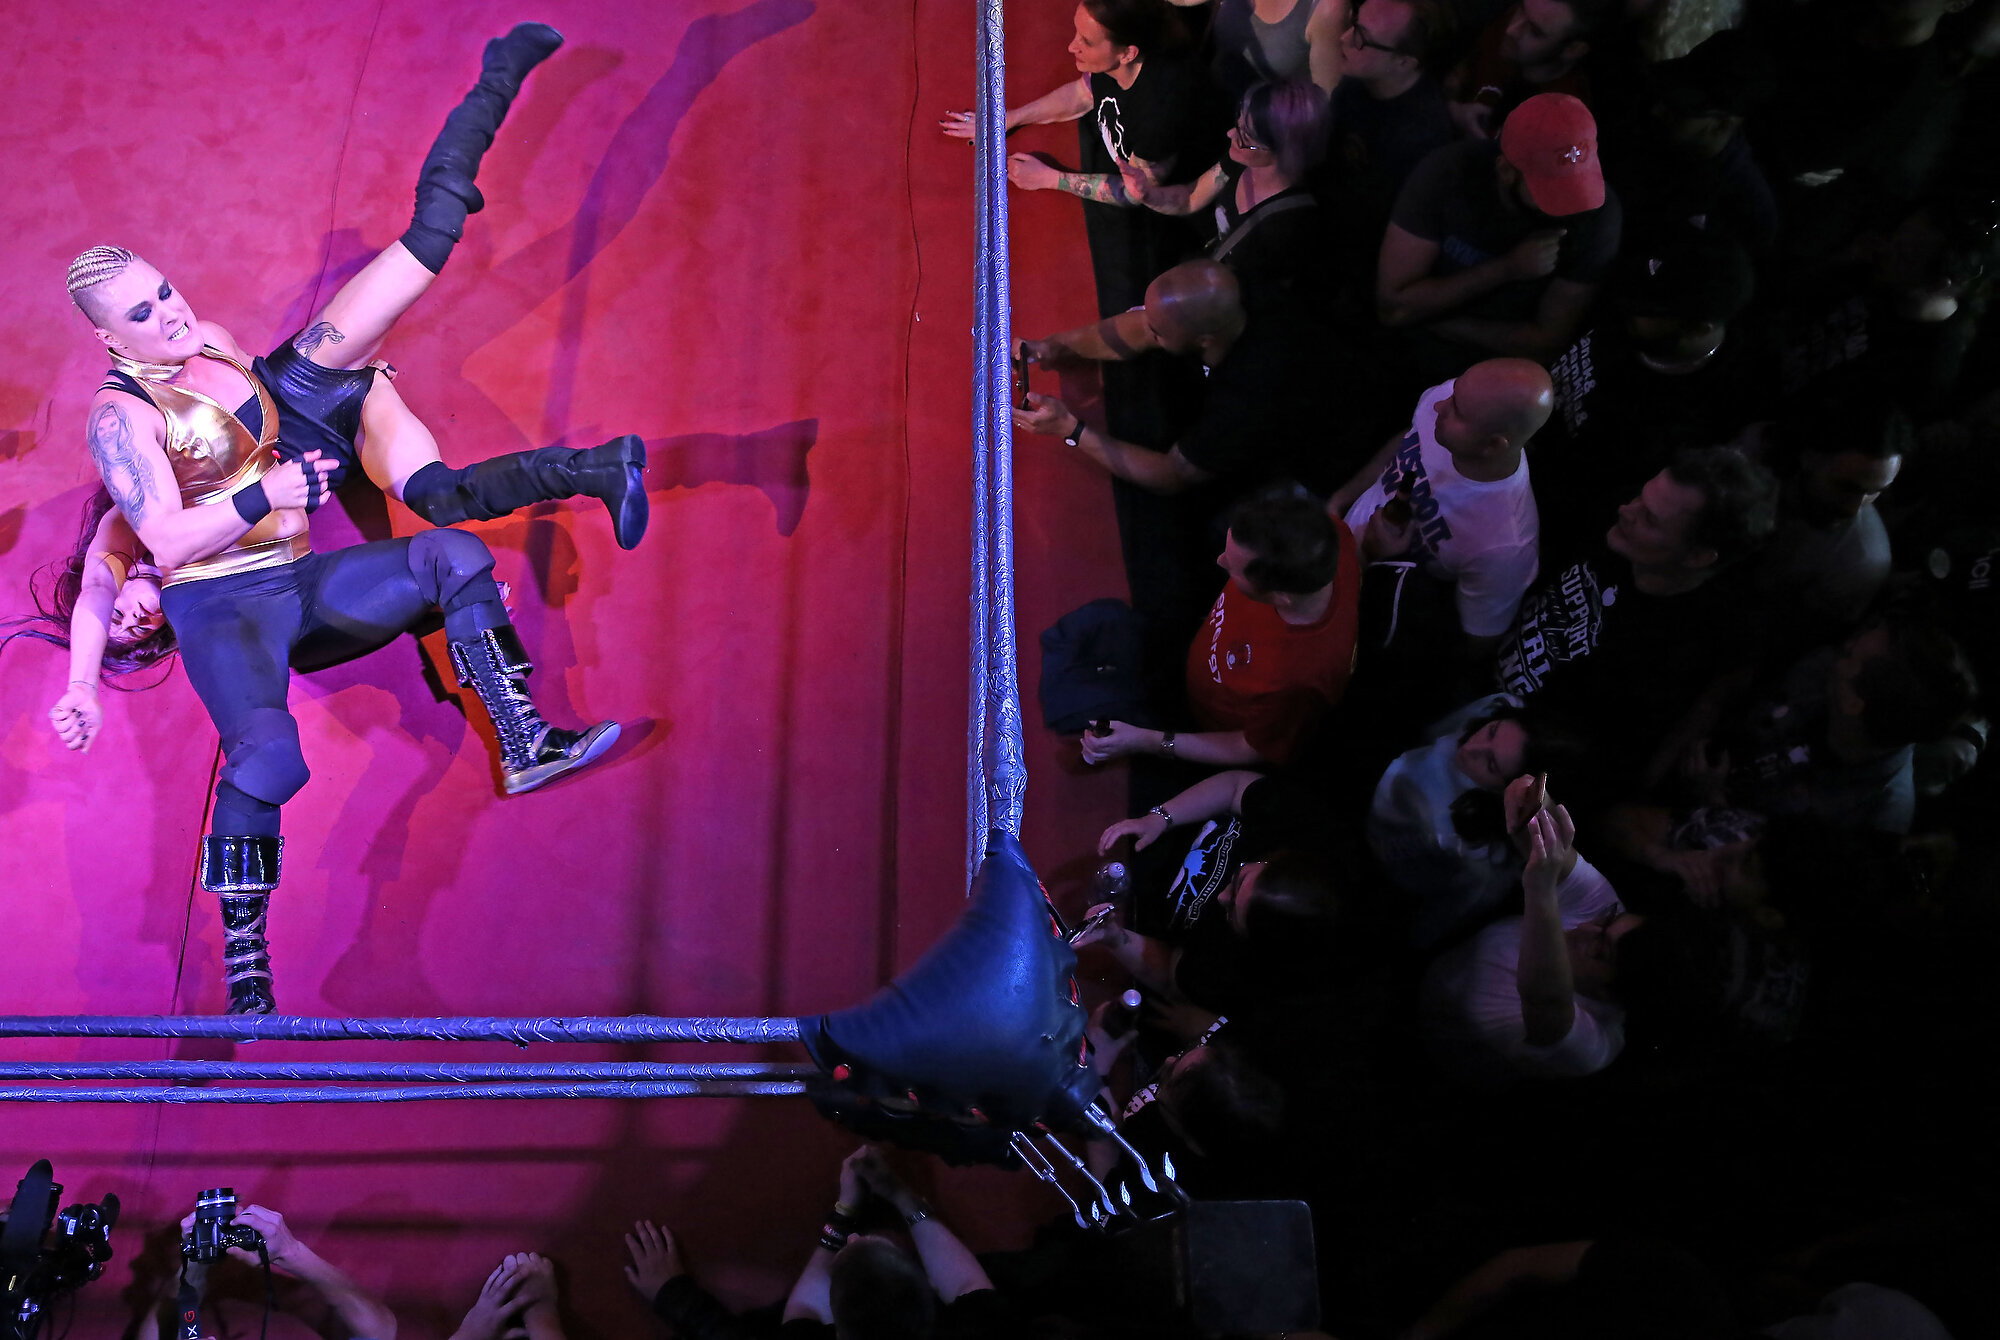  The crowd watches as professional wrestlers perform at an EVE all-female wrestling event in London. EVE (EVE) is a British independent women's professional wrestling promotion founded in 2010 incorporating feminism, punk rock, and professional wrest